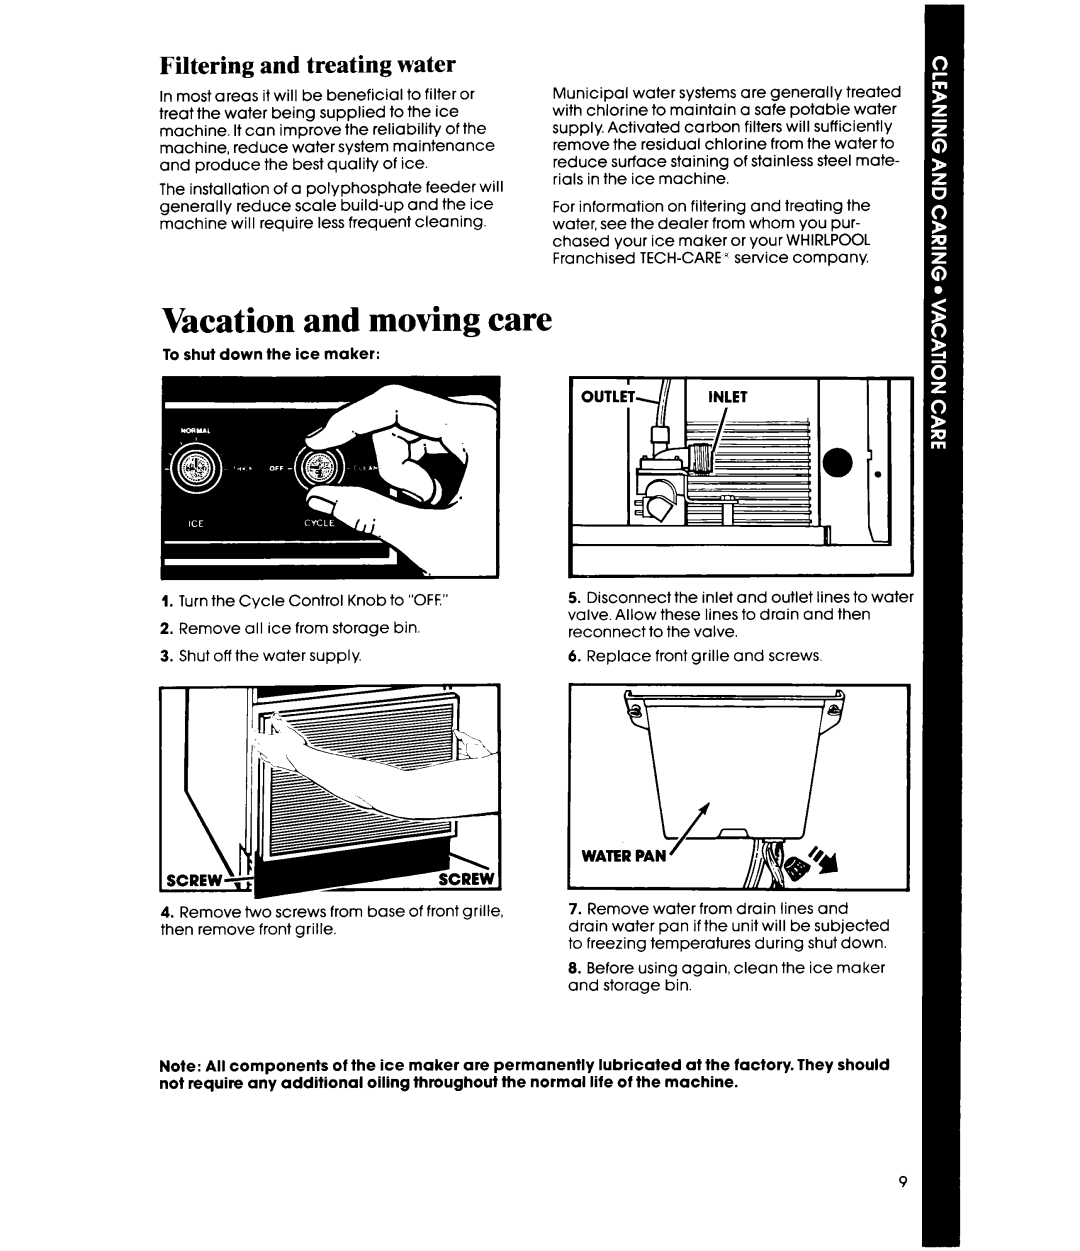 Whirlpool EC5100 manual Vacation and moving care, Filtering and treating water 